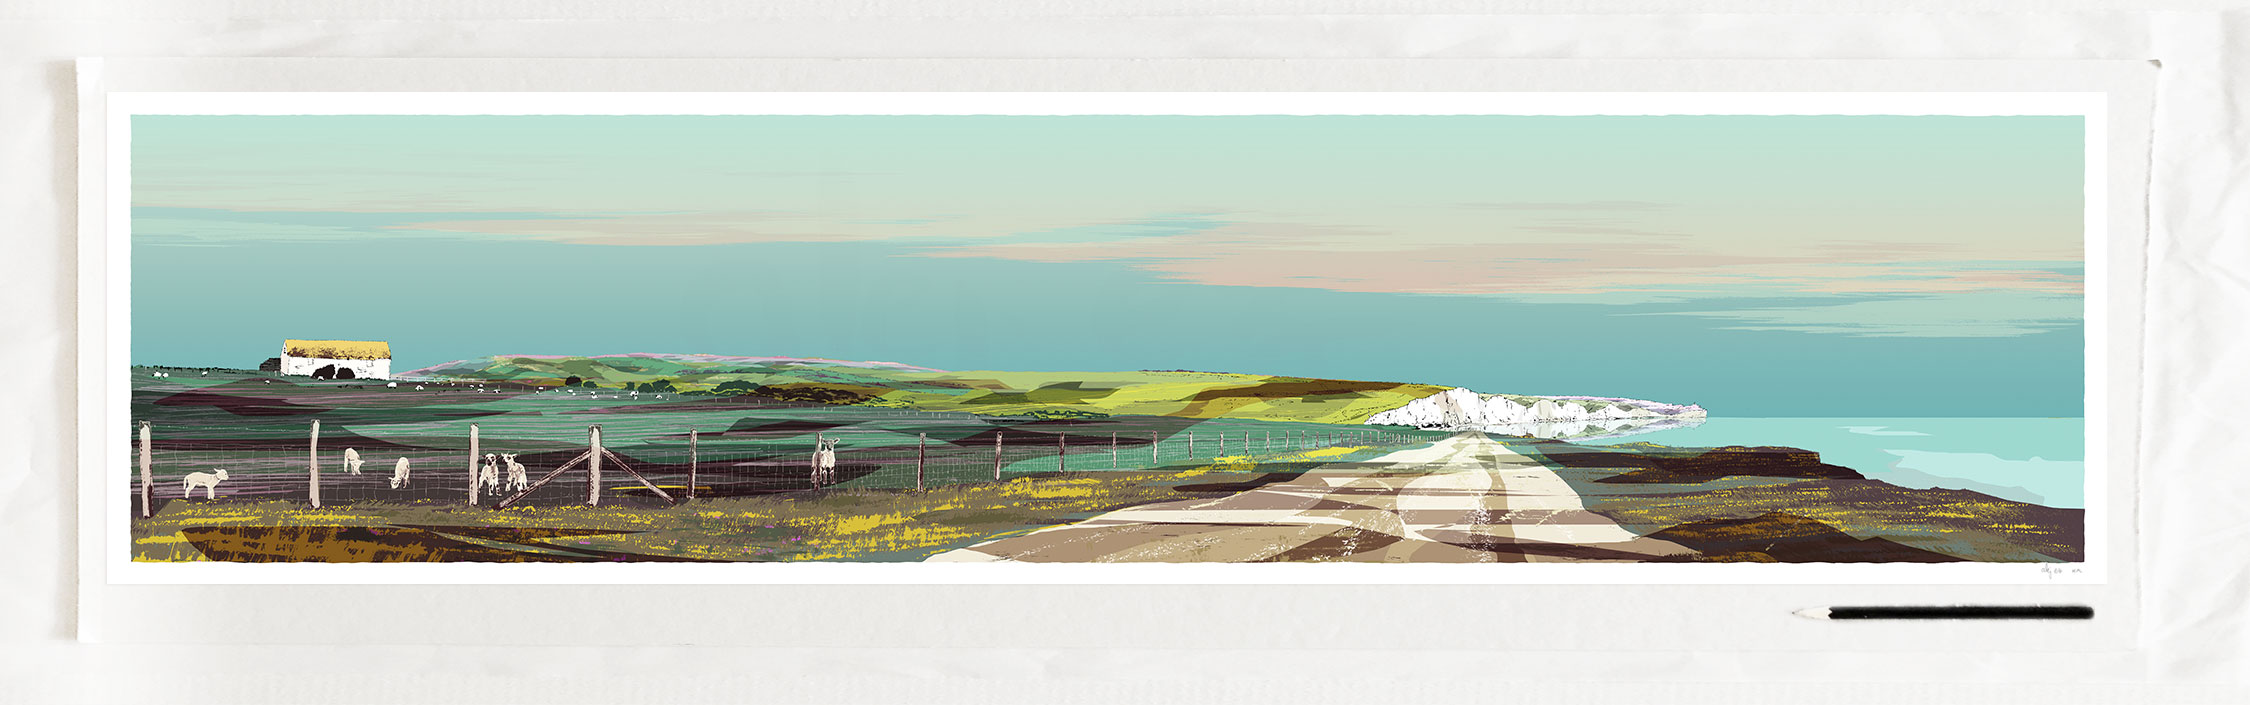 art print titledSpring Lambs South Downs Seven Sisters Cliffs from South Hill Barn by artist alej ez